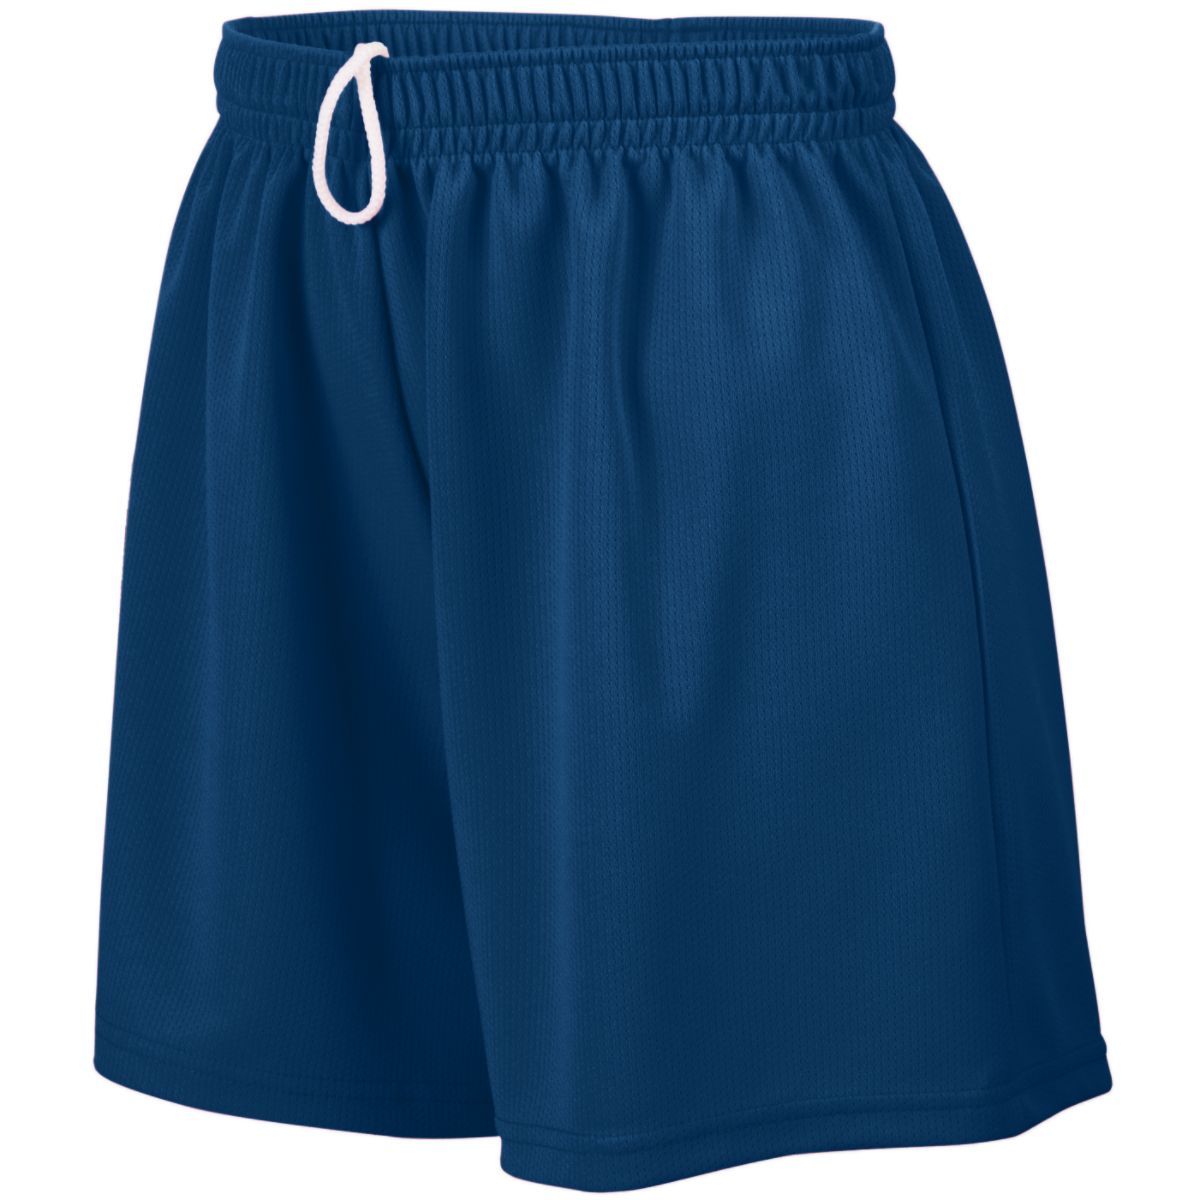 Augusta Sportswear Girls Wicking Mesh Shorts in Navy  -Part of the Girls, Augusta-Products, Lacrosse, Girls-Shorts, All-Sports, All-Sports-1 product lines at KanaleyCreations.com